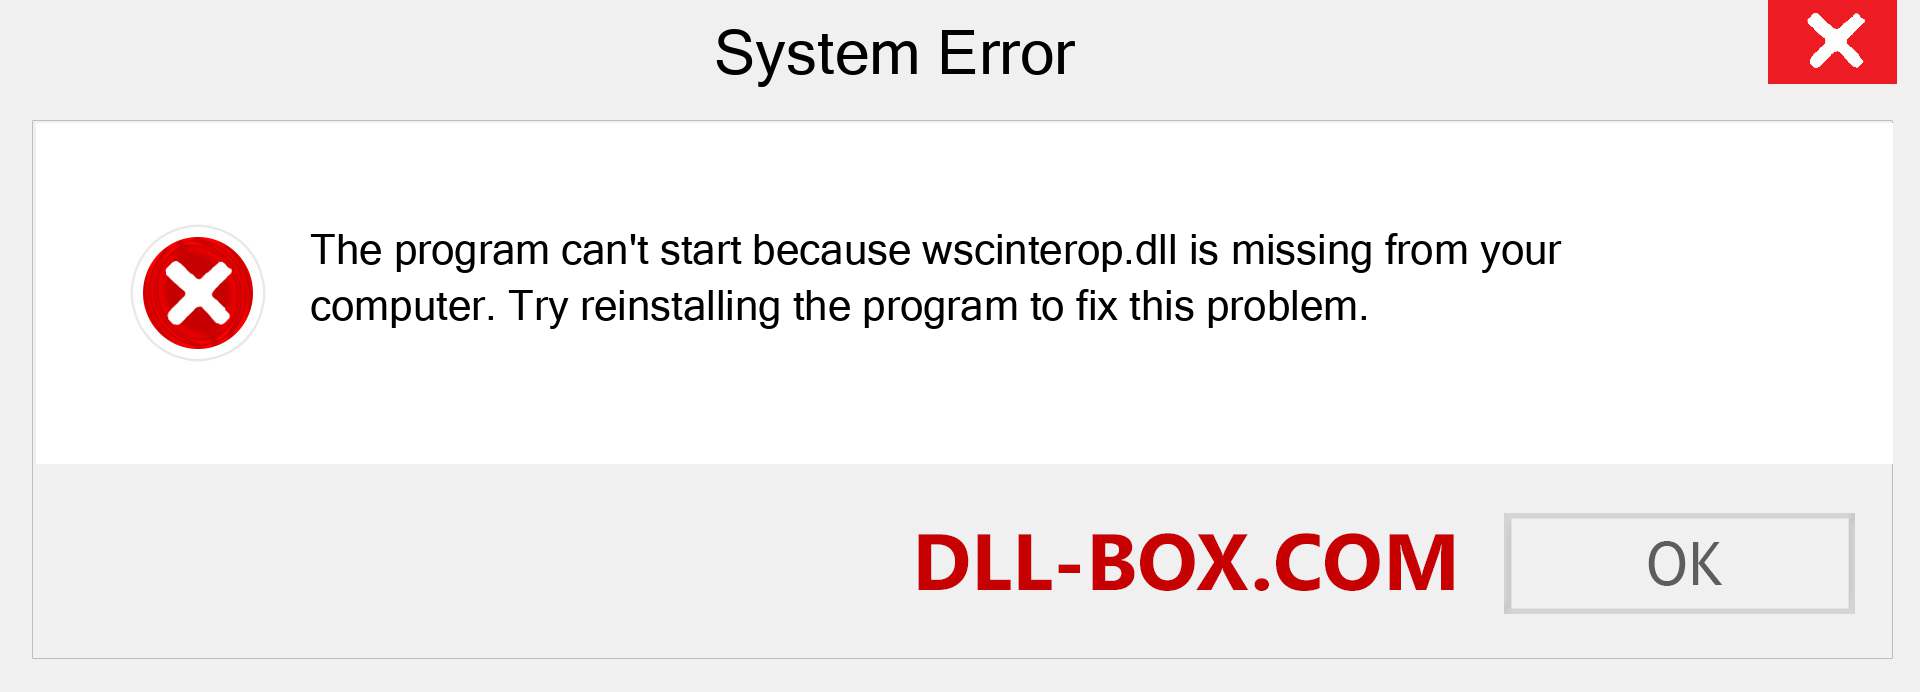  wscinterop.dll file is missing?. Download for Windows 7, 8, 10 - Fix  wscinterop dll Missing Error on Windows, photos, images